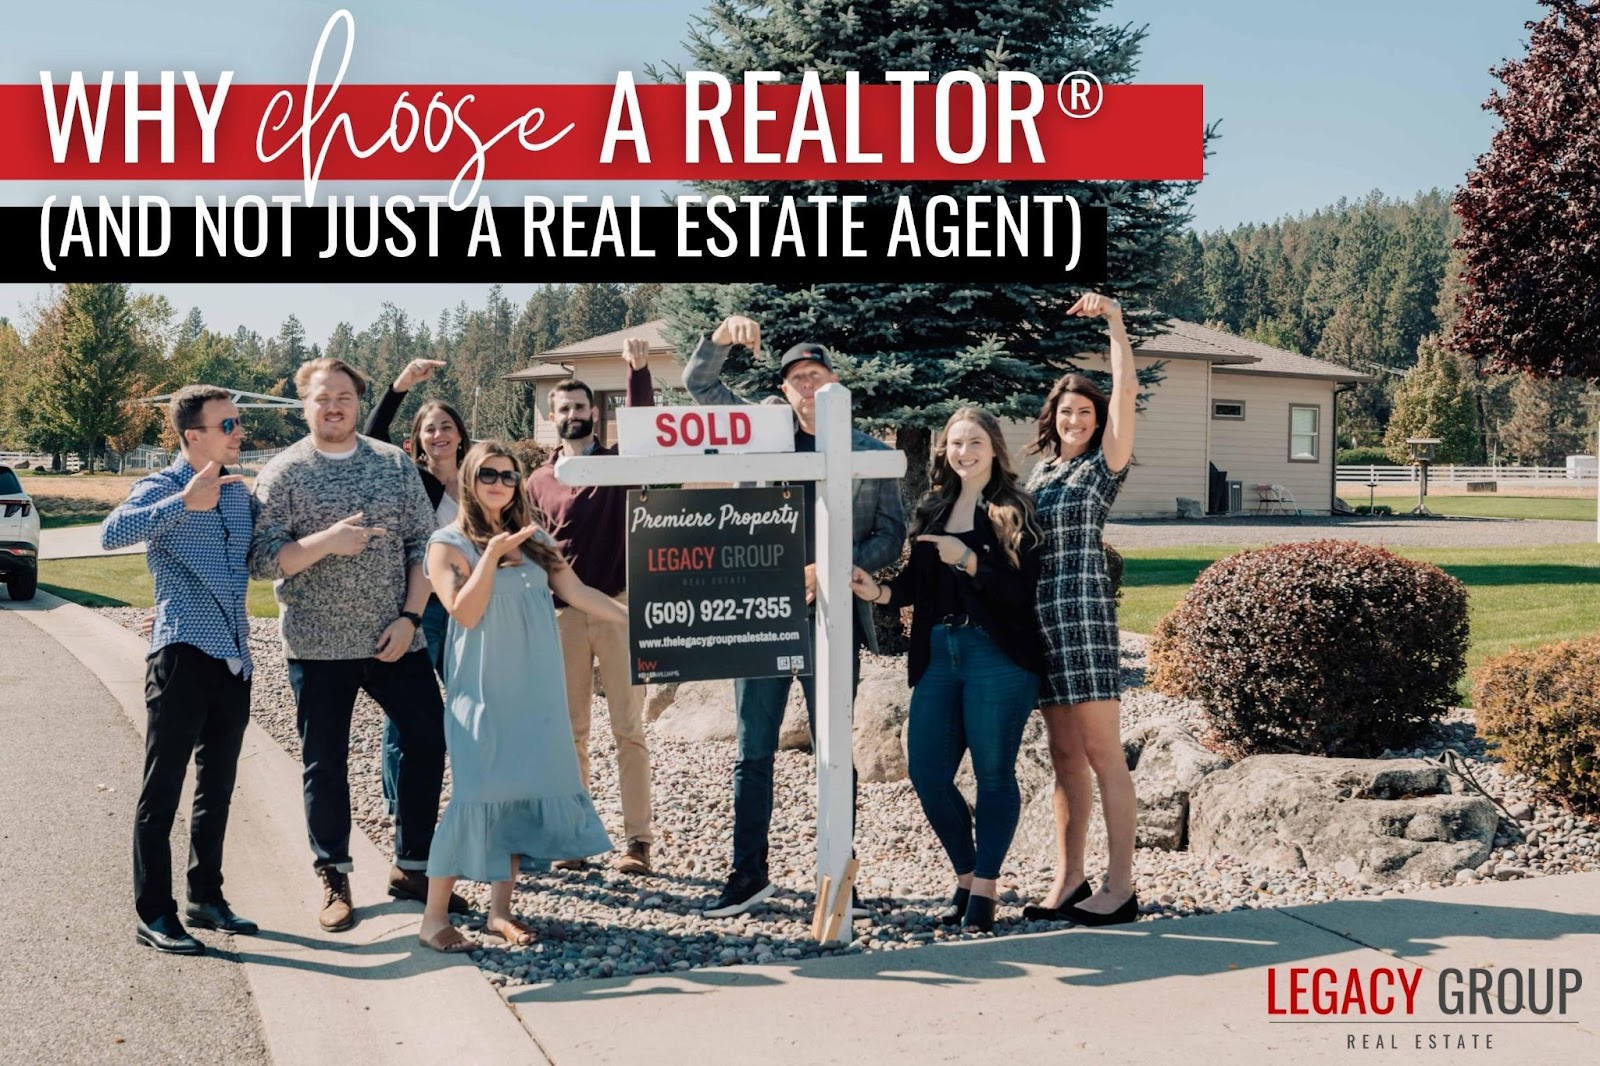 Why Choose a Realtor (and Not Just a Real Estate Agent)